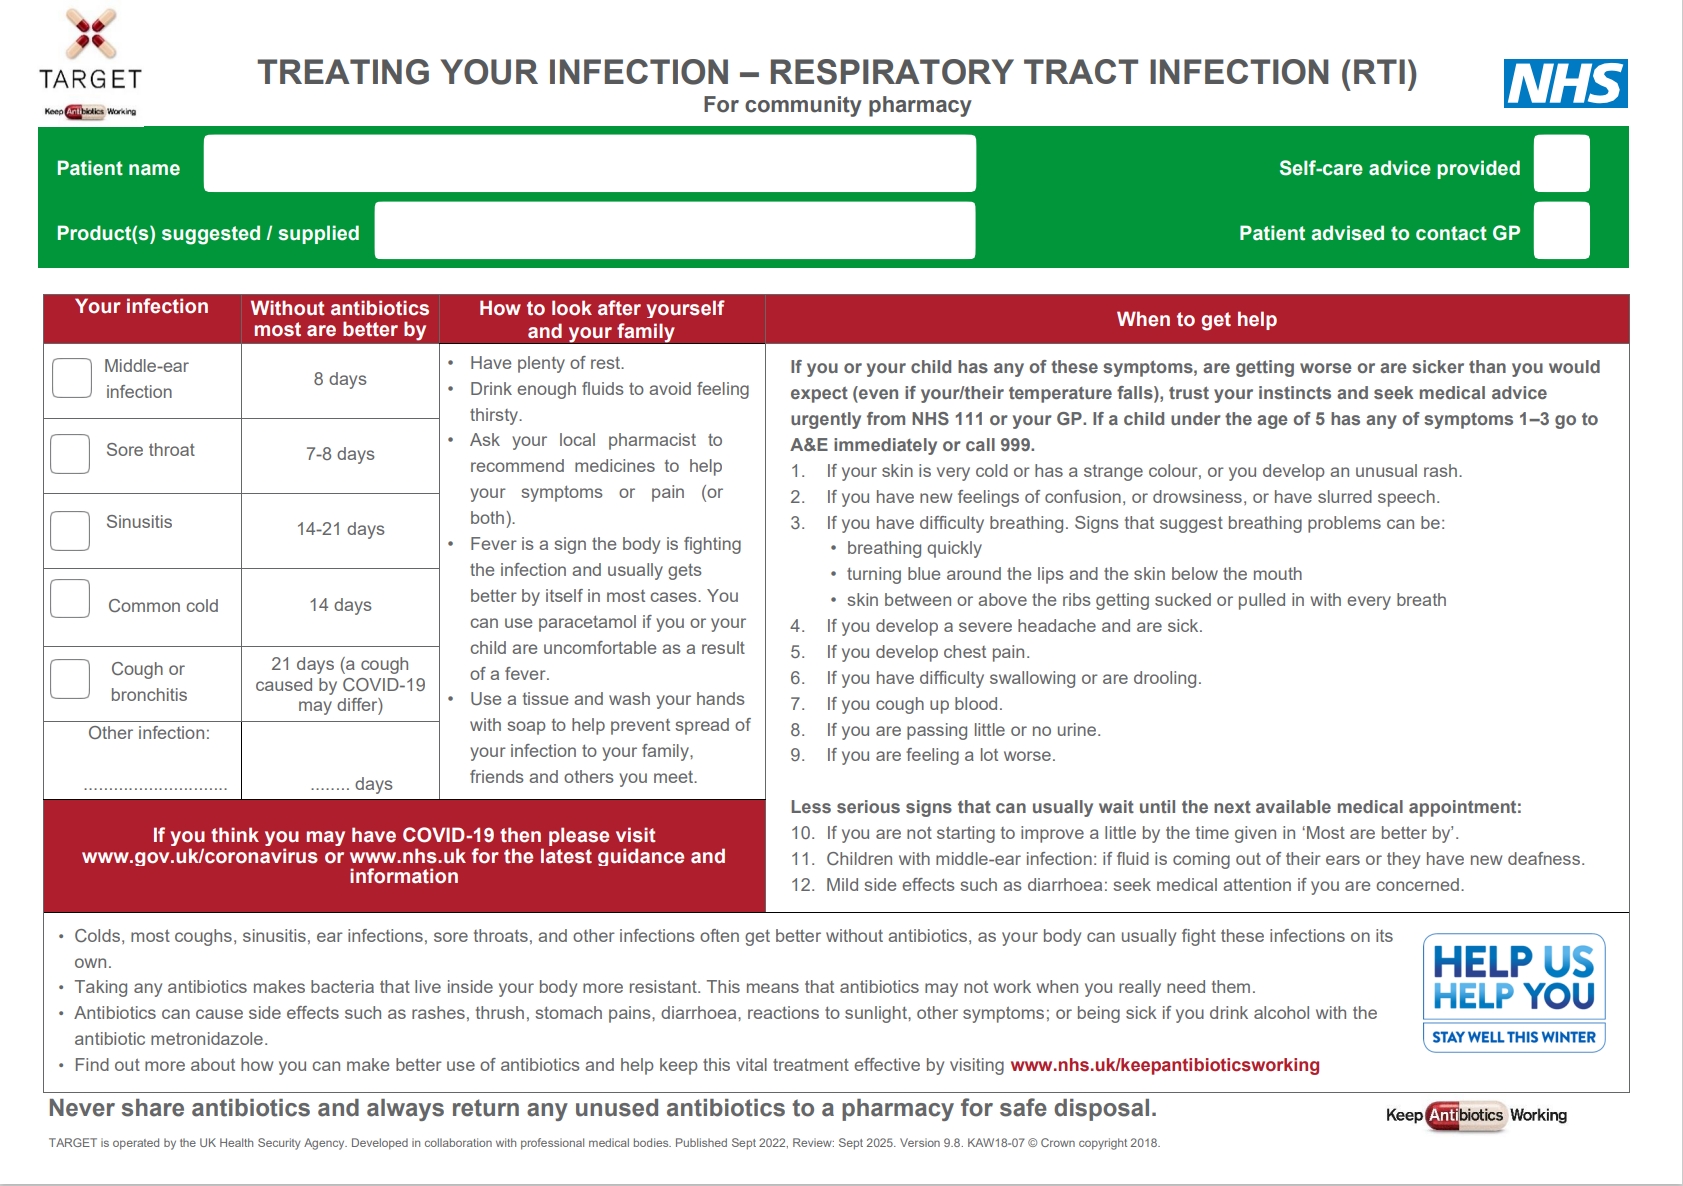 A screenshot of the RTI leaflet for community pharmacies leaflet resource once downloaded.